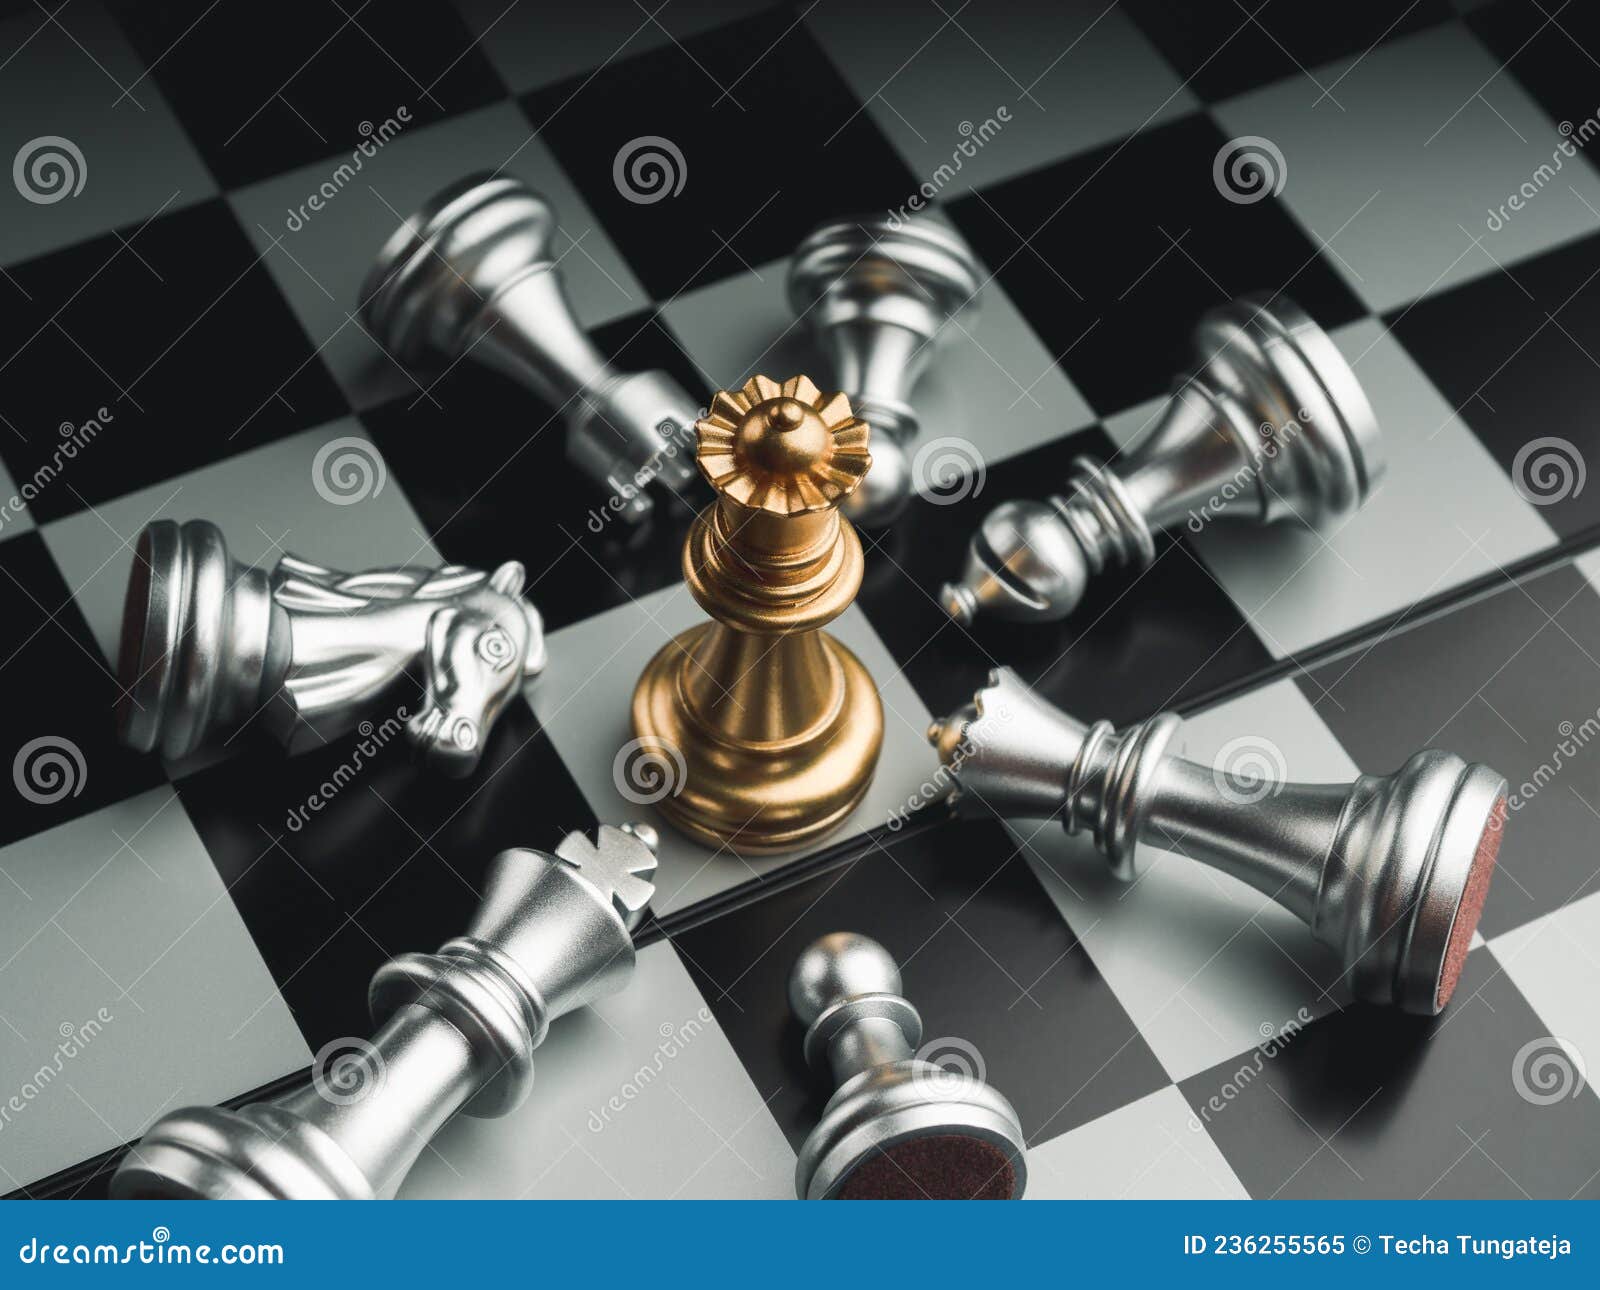 The gold horse, knight chess piece standing with falling silver pawn chess  pieces on chessboard on white background with copy space. Leadership,  winner, competition, and business strategy concept. Photos